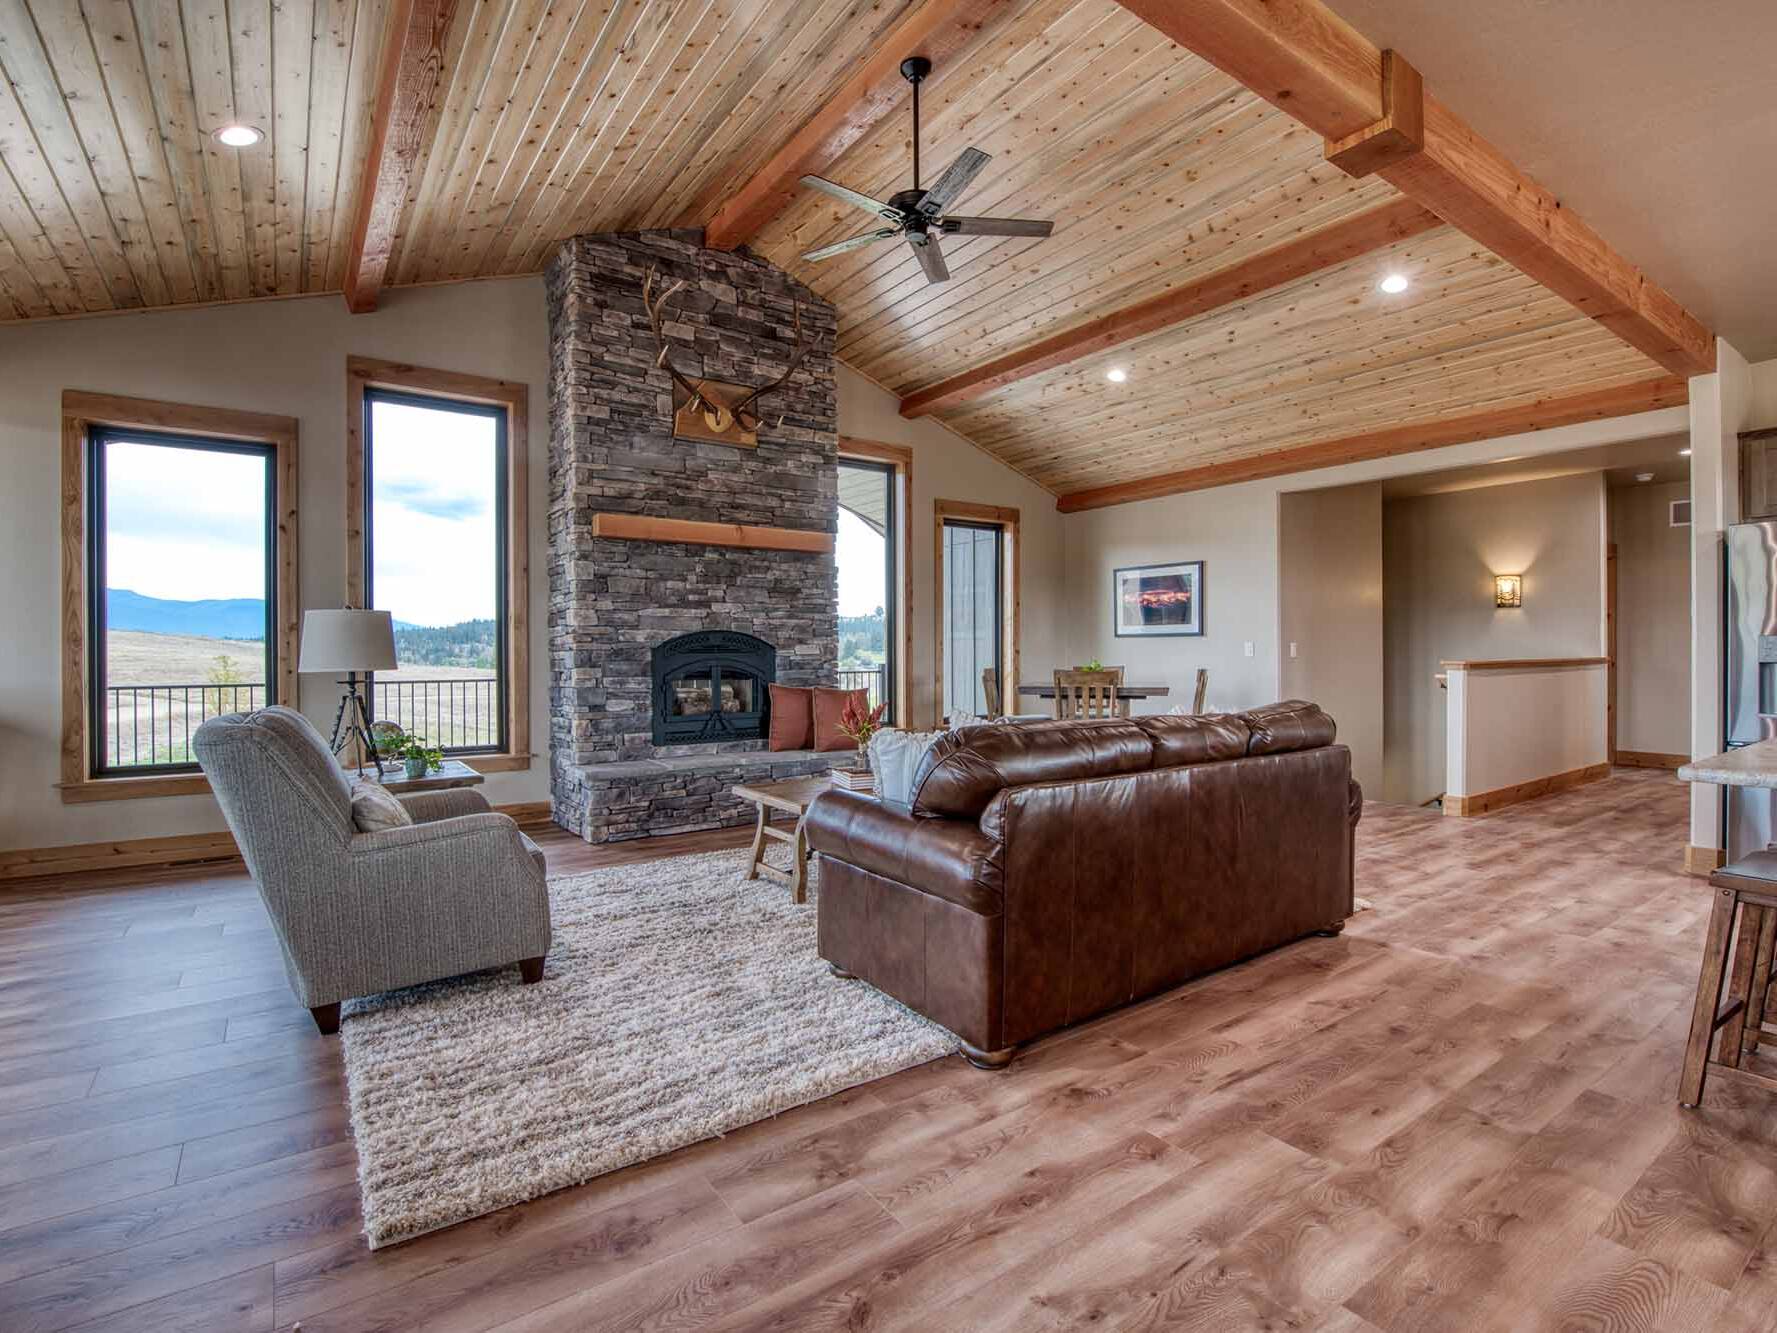 Living Room with a wood burning fireplace, vaulted ceiling, blue pine t&g ceiling, and timber accents in a custom home built by Big Sky Builders in Stevensville, MT